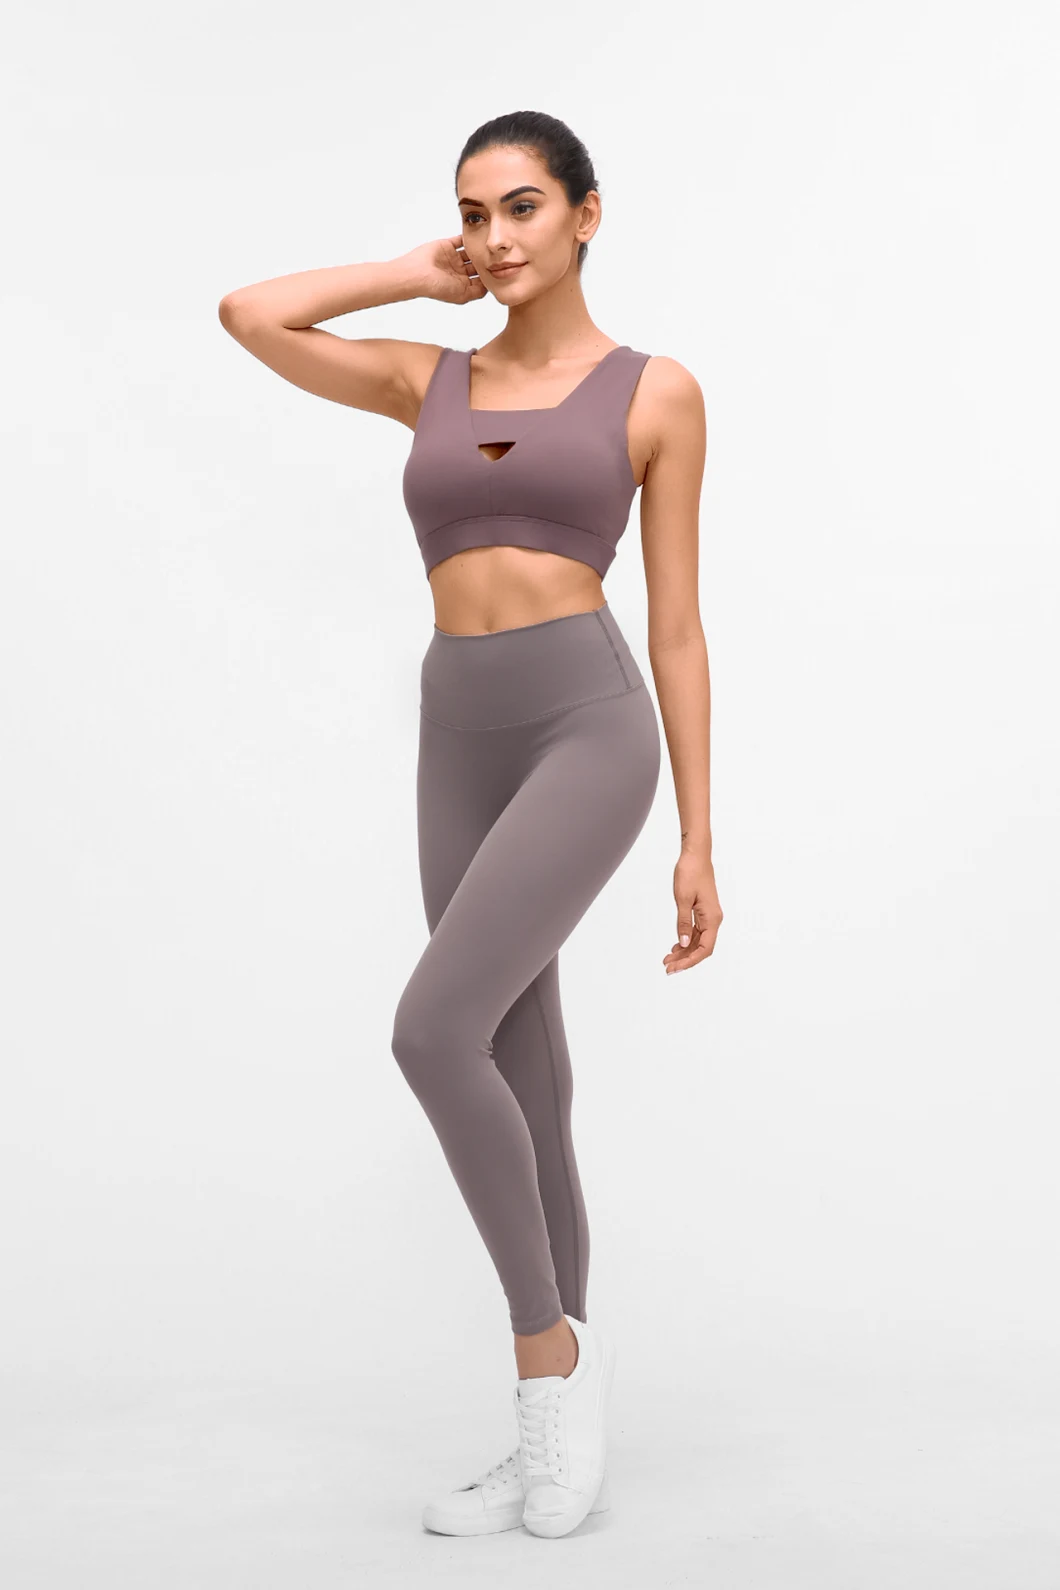 Estanla Double-Sided Brushed Nude Seamless Yoga Pants HIPS High Waist Running Sports Fitness Long Pants